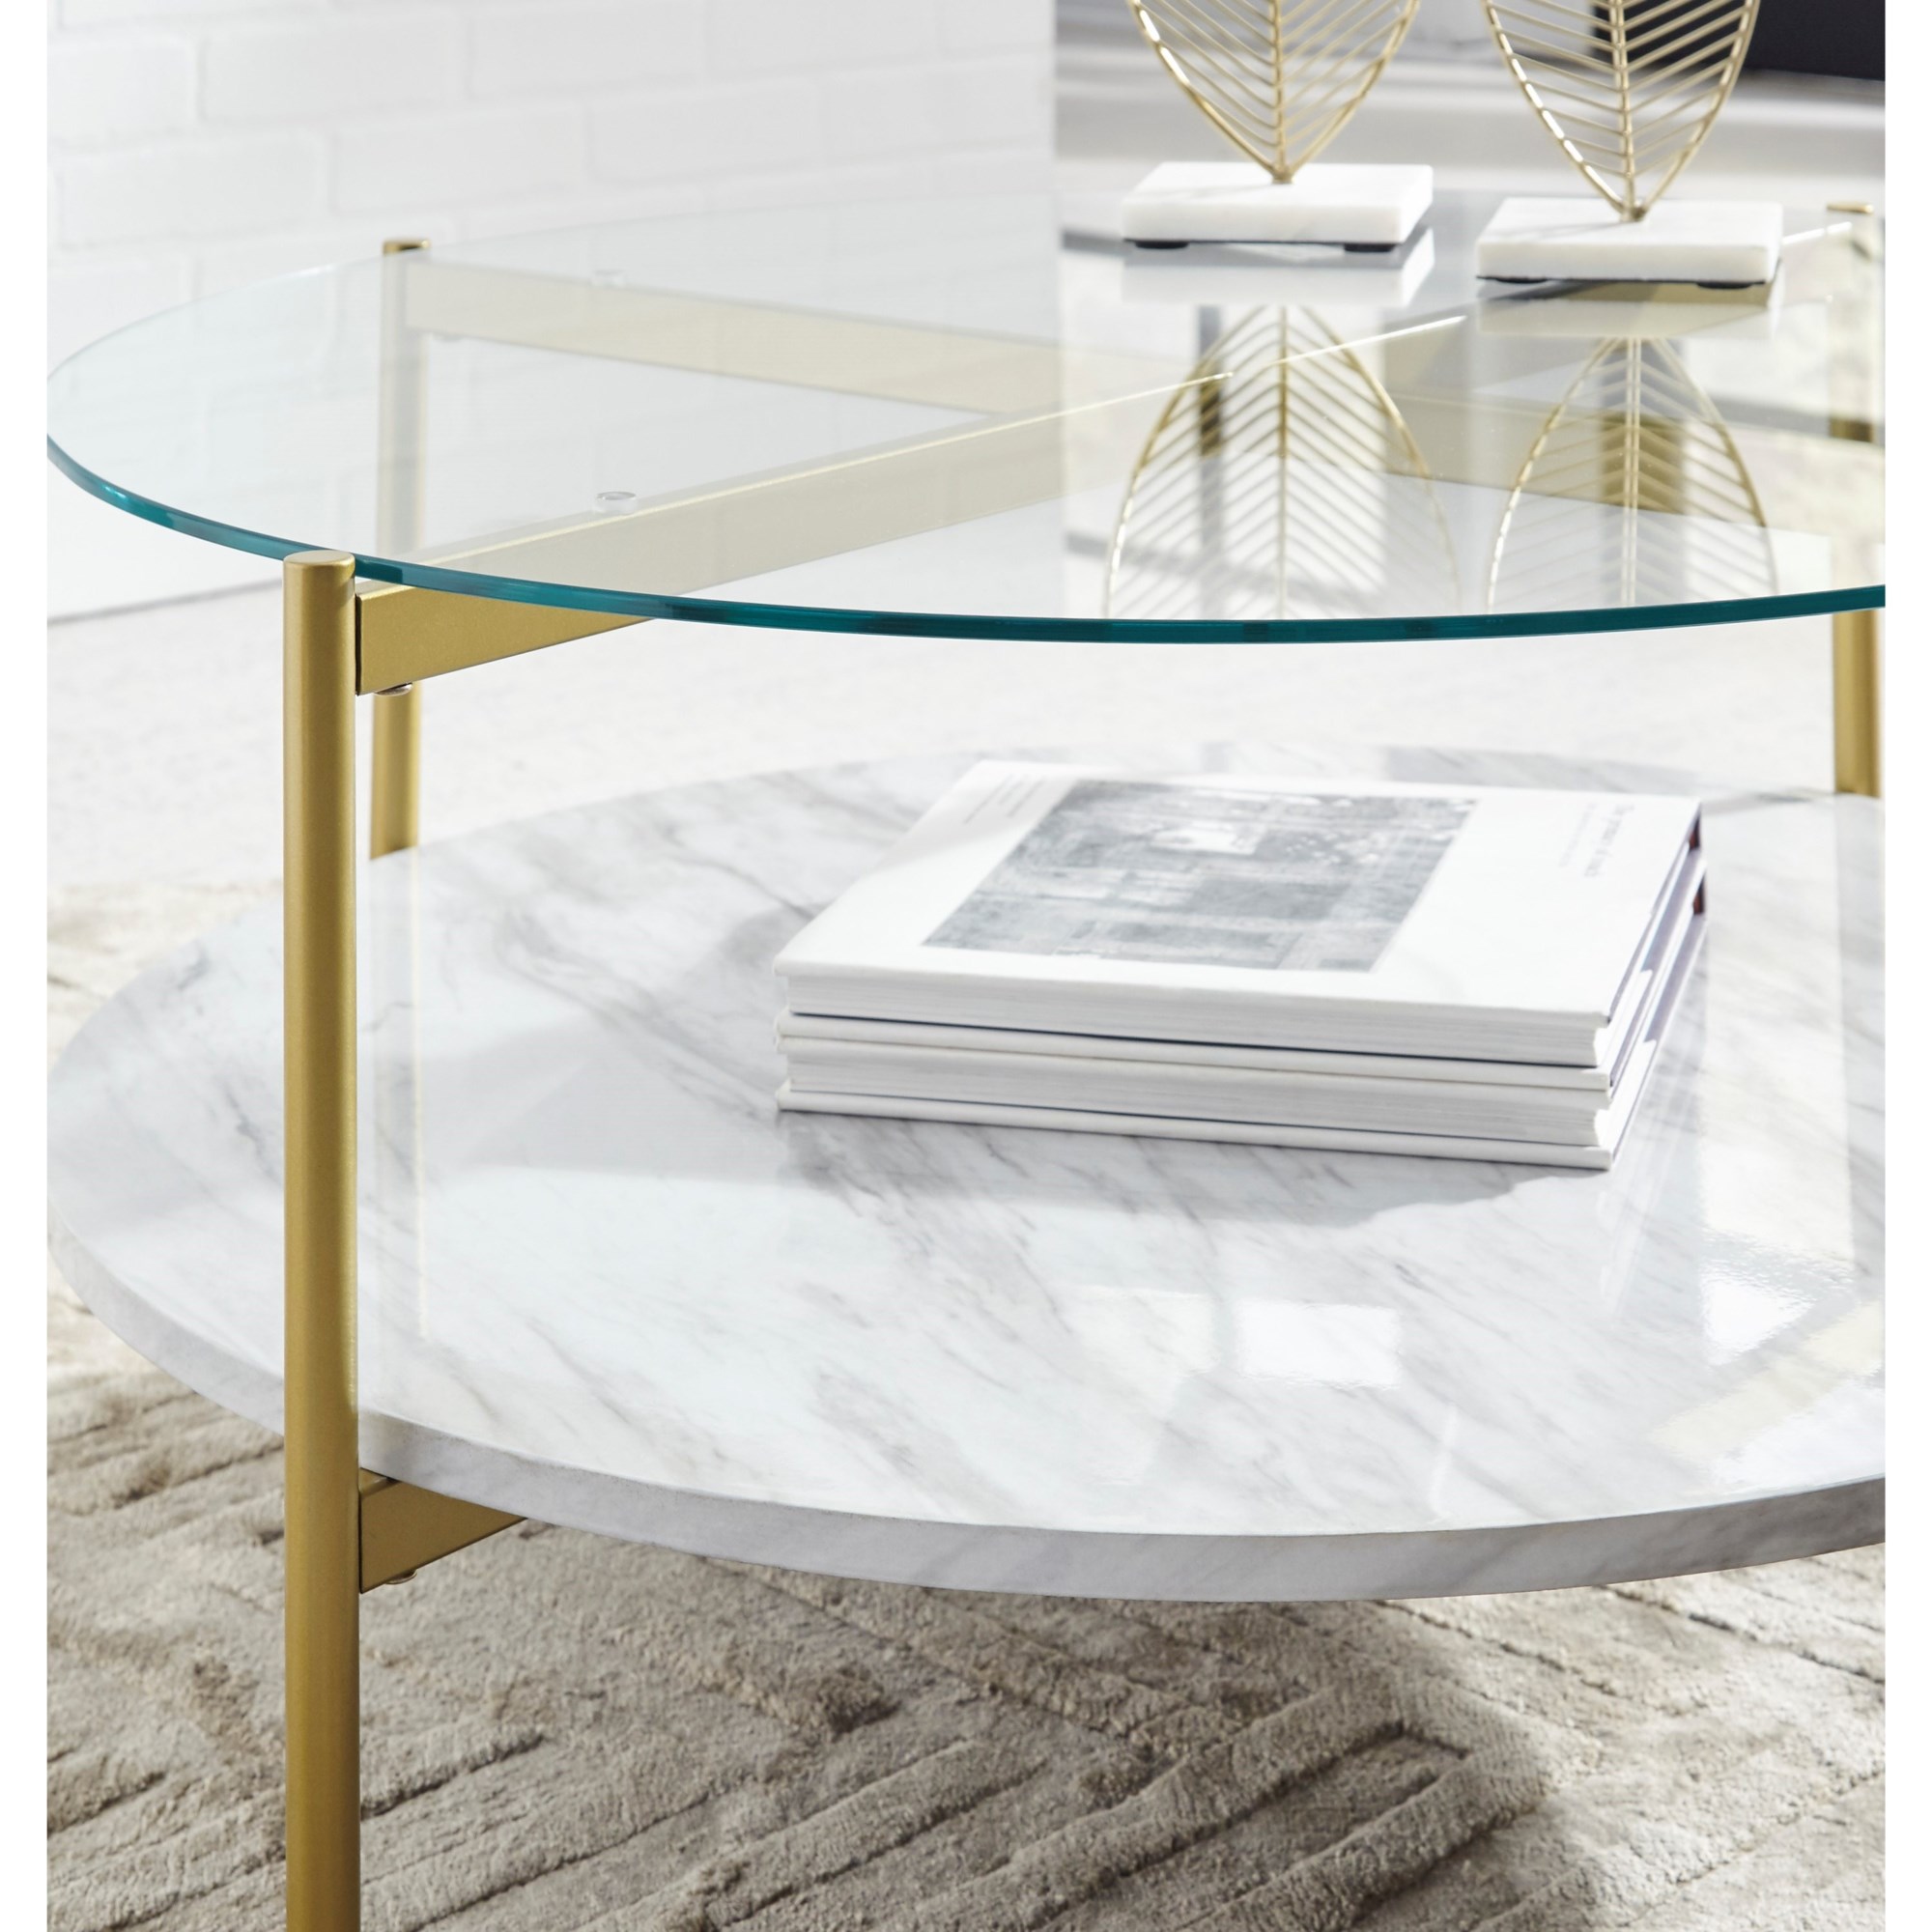 Signature Design by Ashley Table with | | Shelf Round Cocktail/Coffee Finish Cocktail Wynora Tables Gold T192-8 Furniture Faux Top Marble and HomeWorld Glass